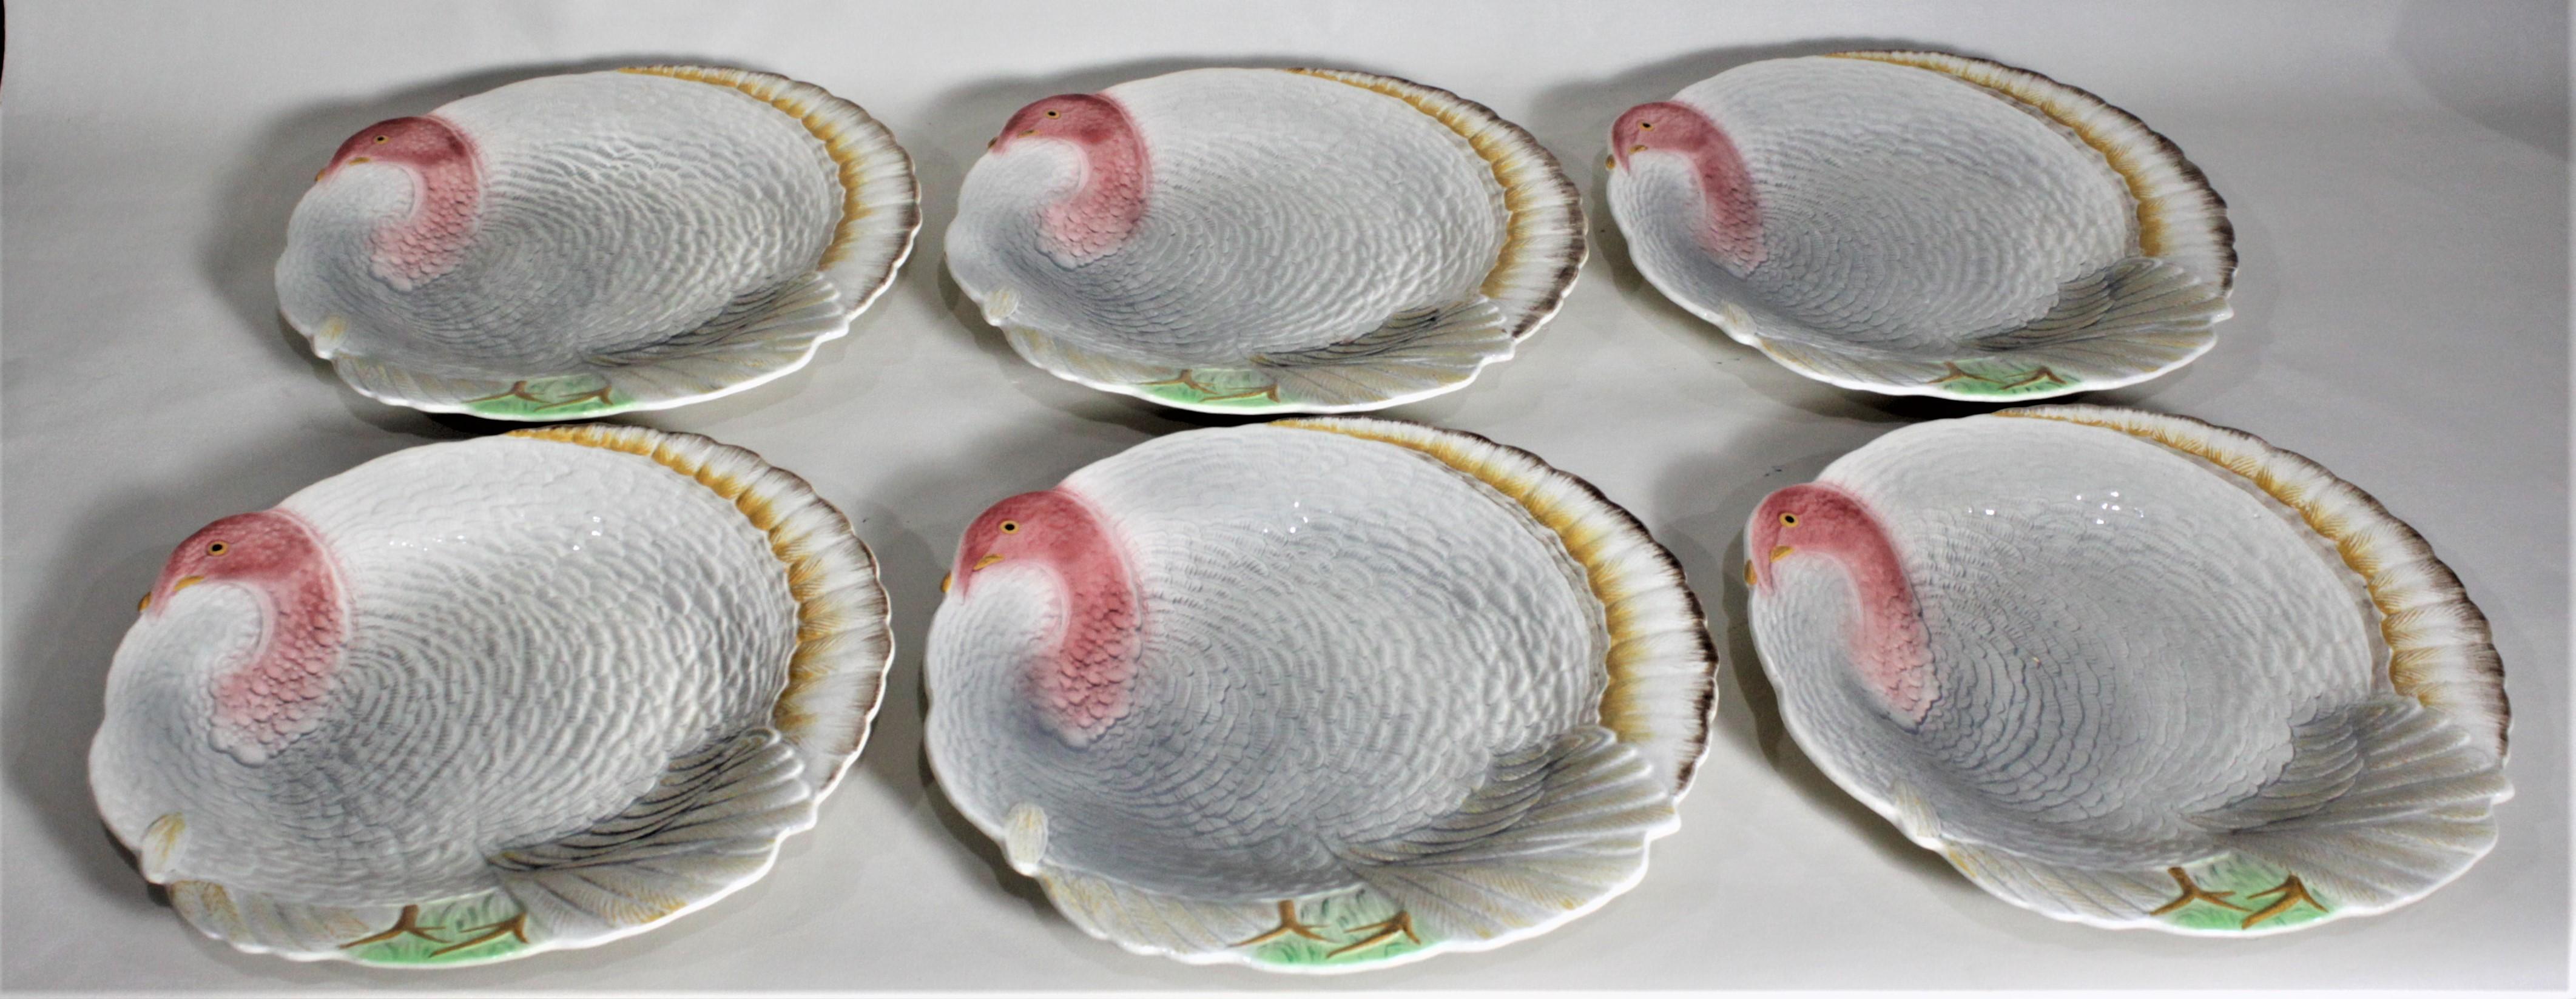 This turkey serving set is made up of a very large platter and a set of six matches serving plates made by Shorter and Sons of Staffordshire England in circa 1950. The large platter features a colorful and stylized turkey done in vibrant tones and a